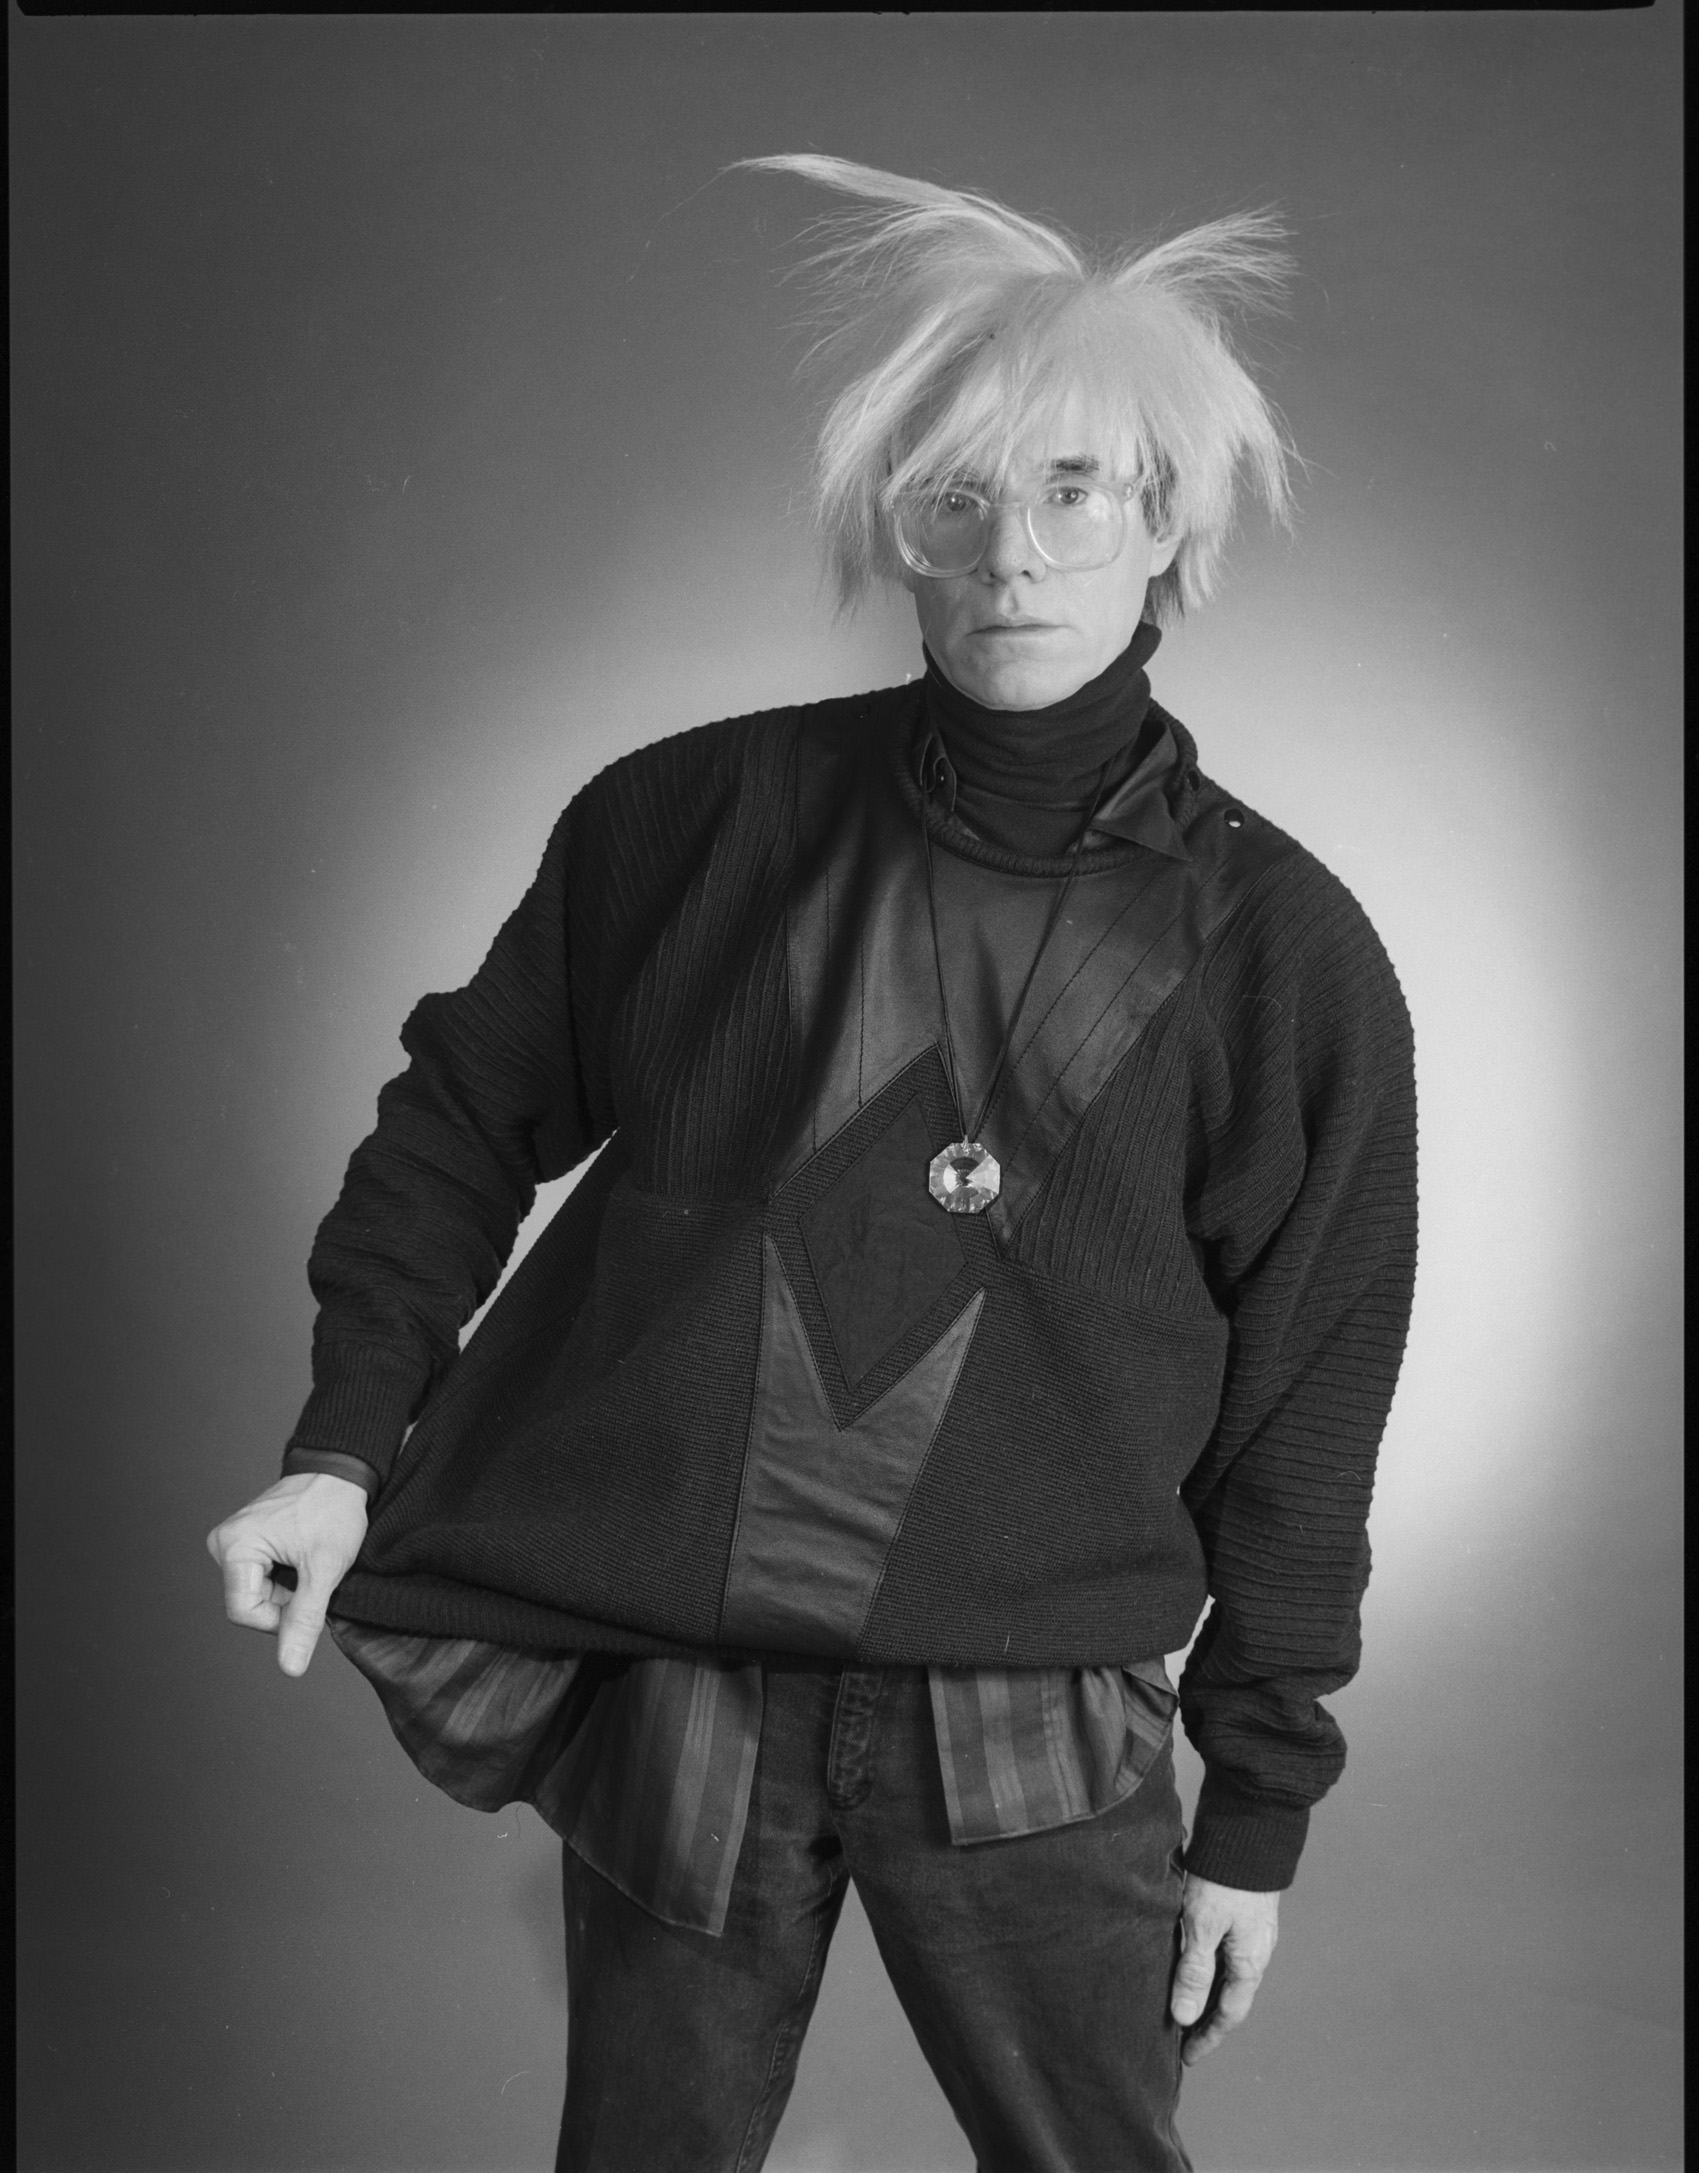 andy warhol clutching a stephen sprouse outfit in a black and white image by christopher makos